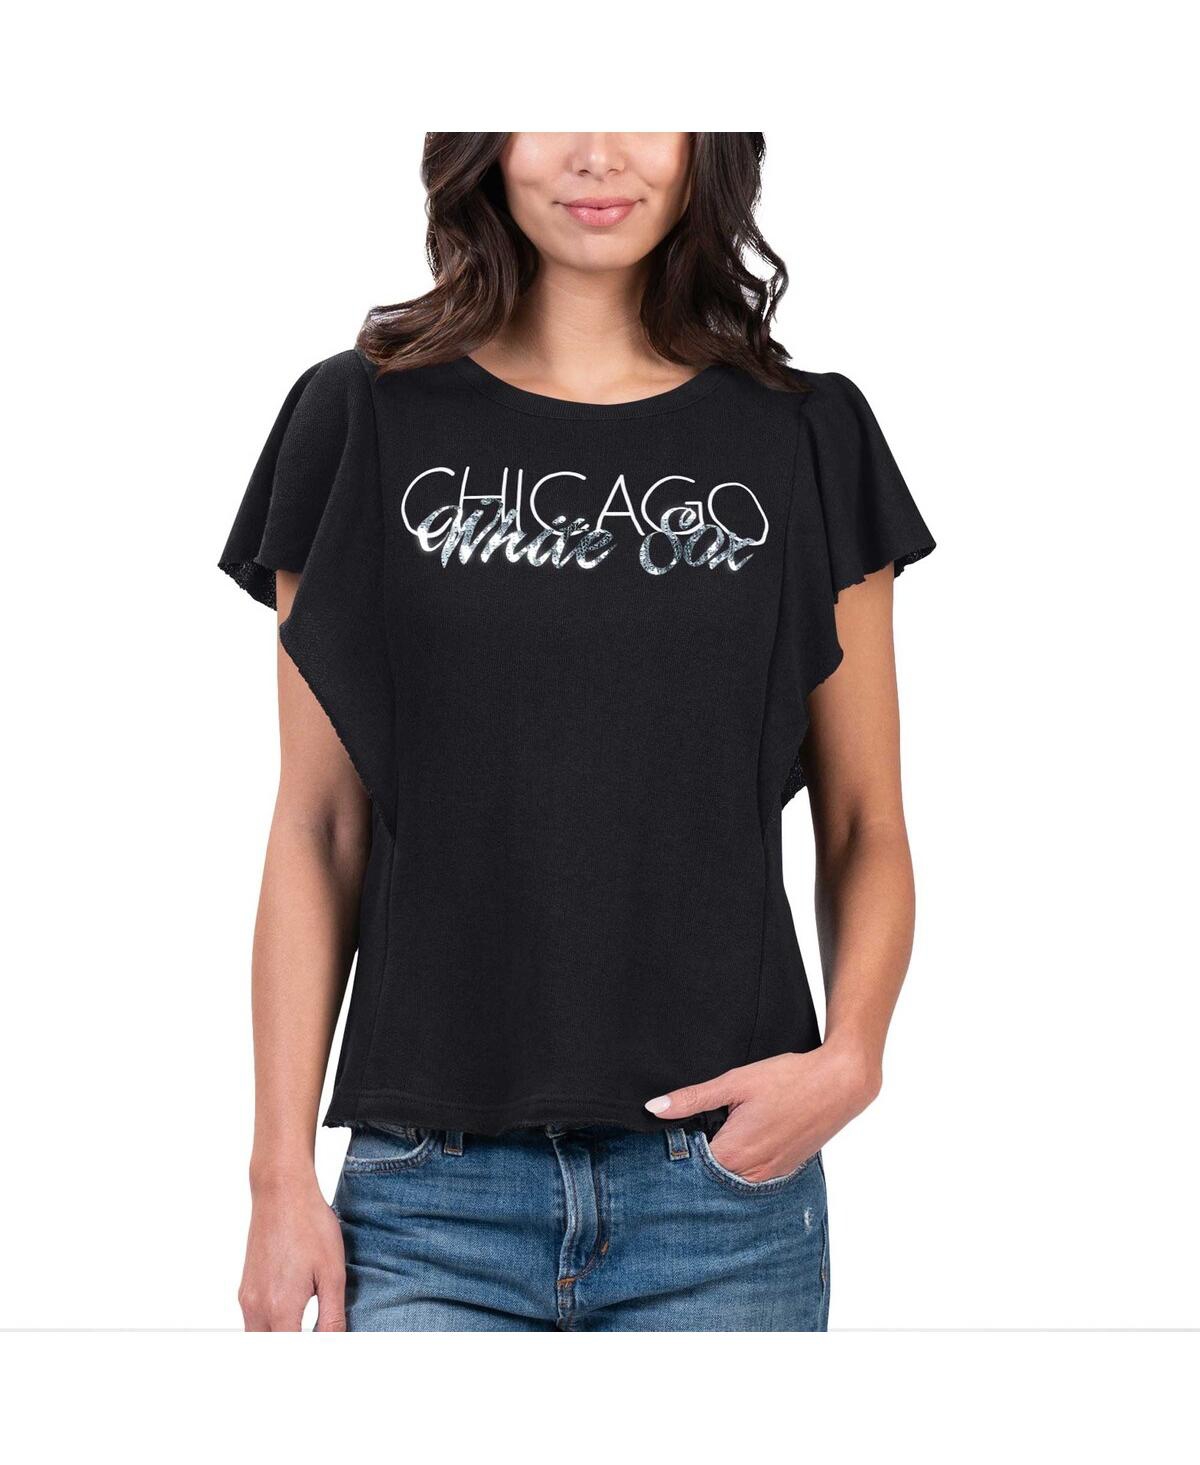 G-III 4HER BY CARL BANKS WOMEN'S G-III 4HER BY CARL BANKS BLACK CHICAGO WHITE SOX CROWD WAVE T-SHIRT